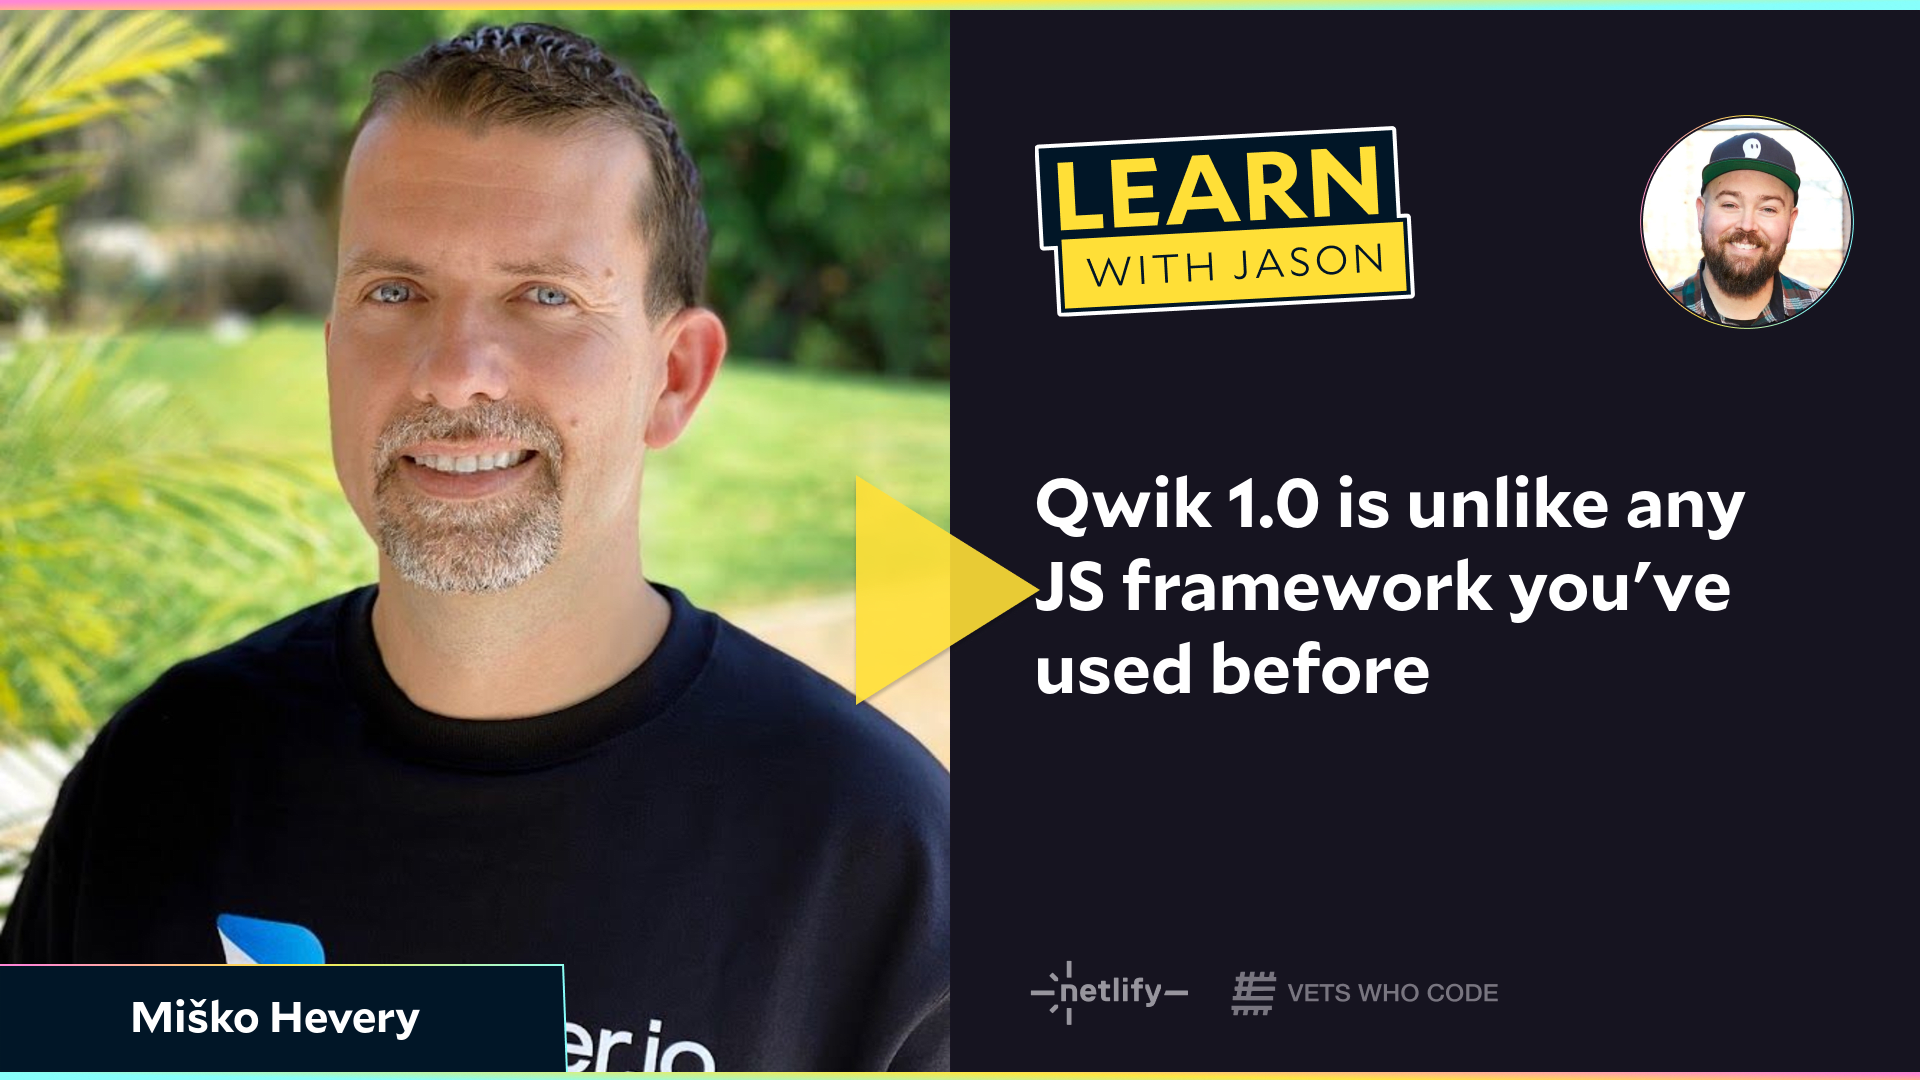 Qwik 1.0 is unlike any JS framework you've used before (with Miško Hevery)